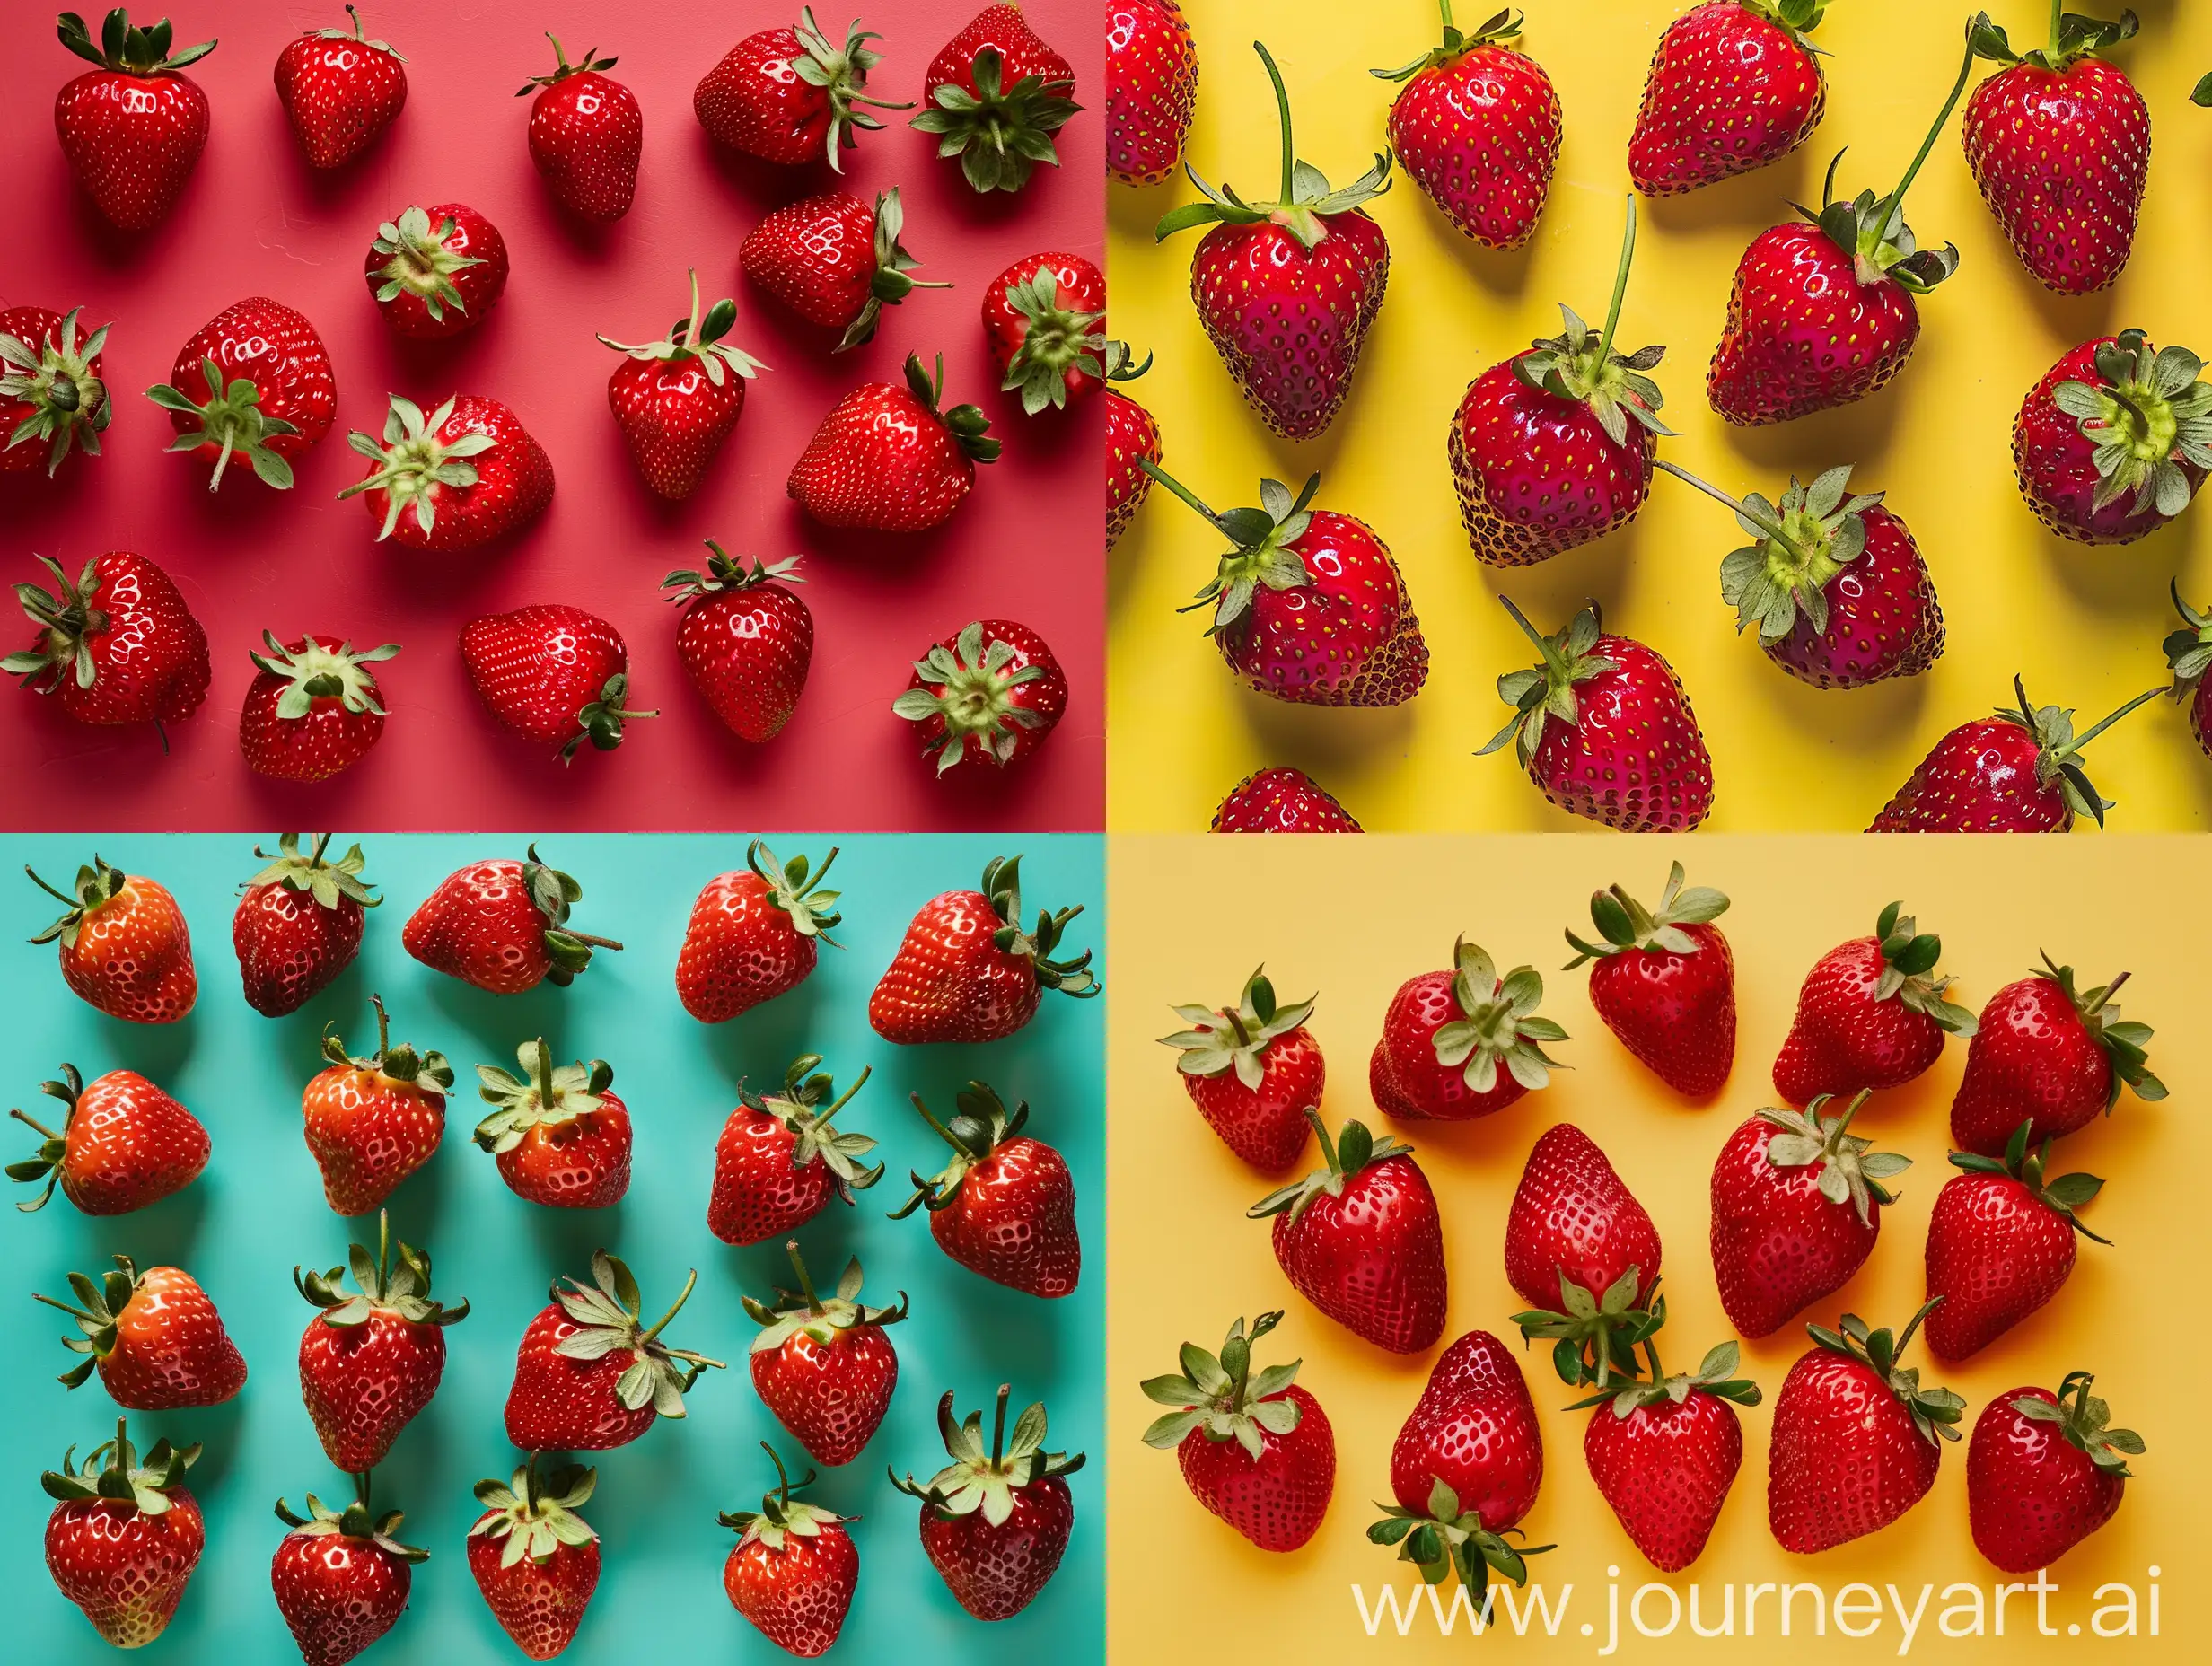 Studio photography with a background of one color of strawberries